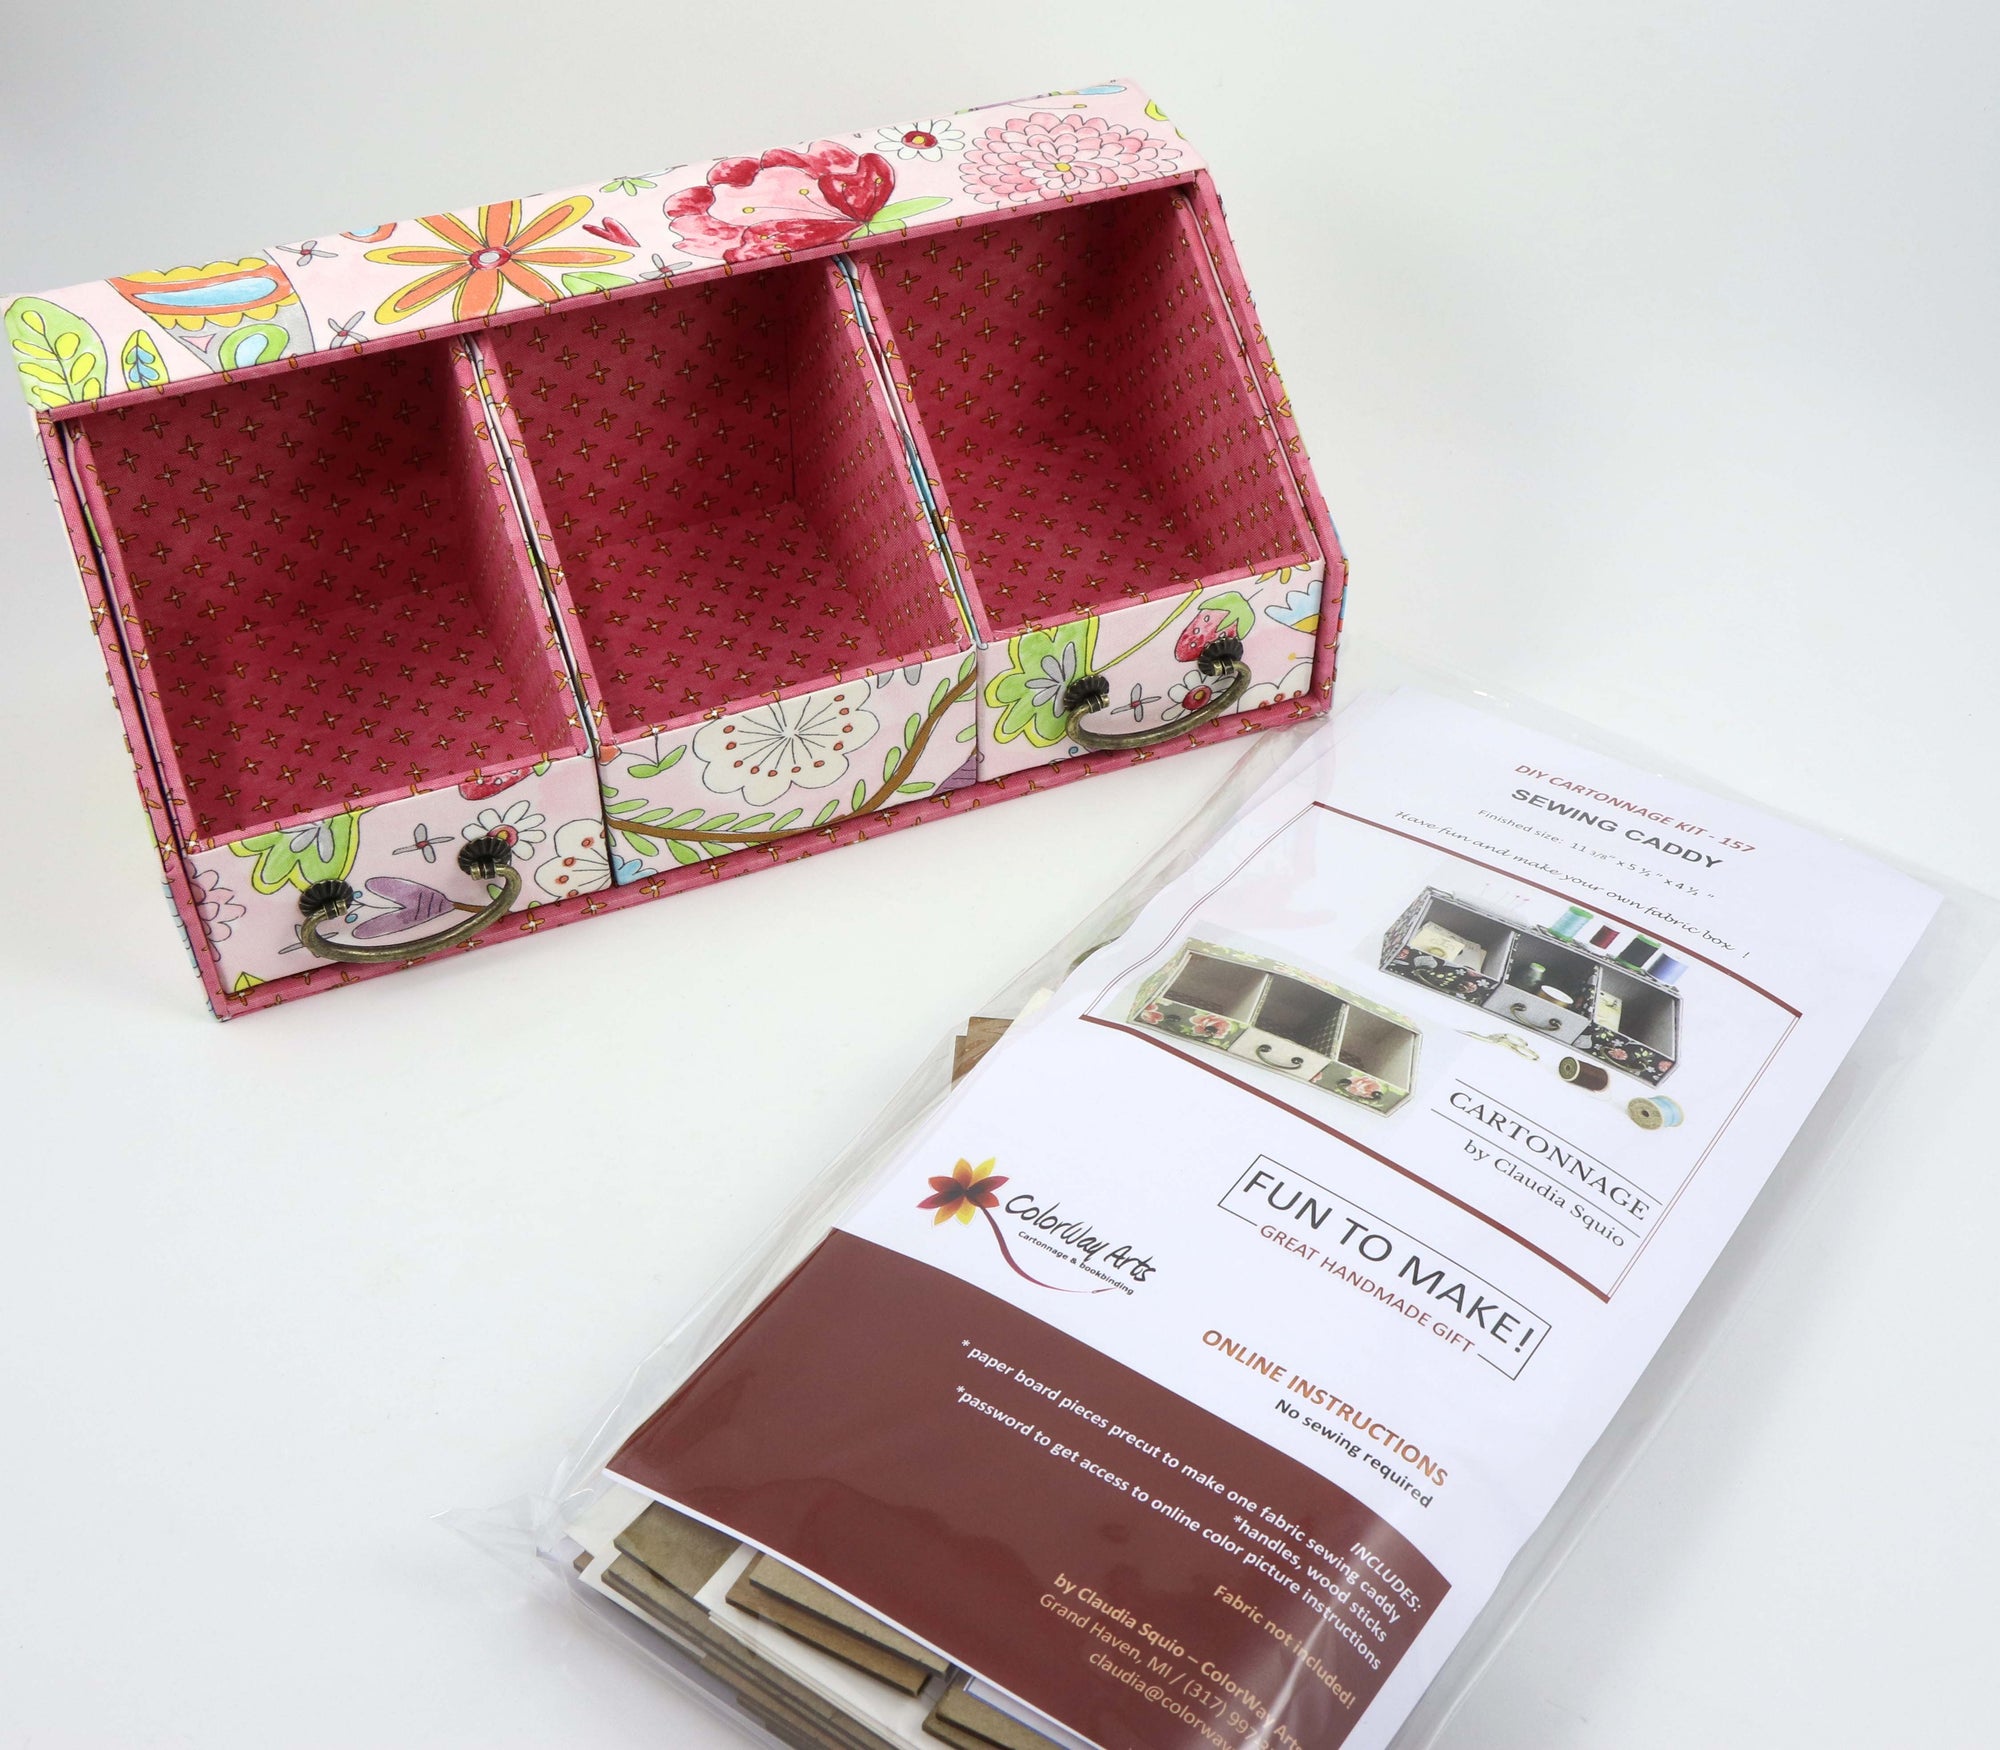 Fabric photo art caddy DIY kit, picture cube, photo caddy, cartonnage -  Colorway Arts